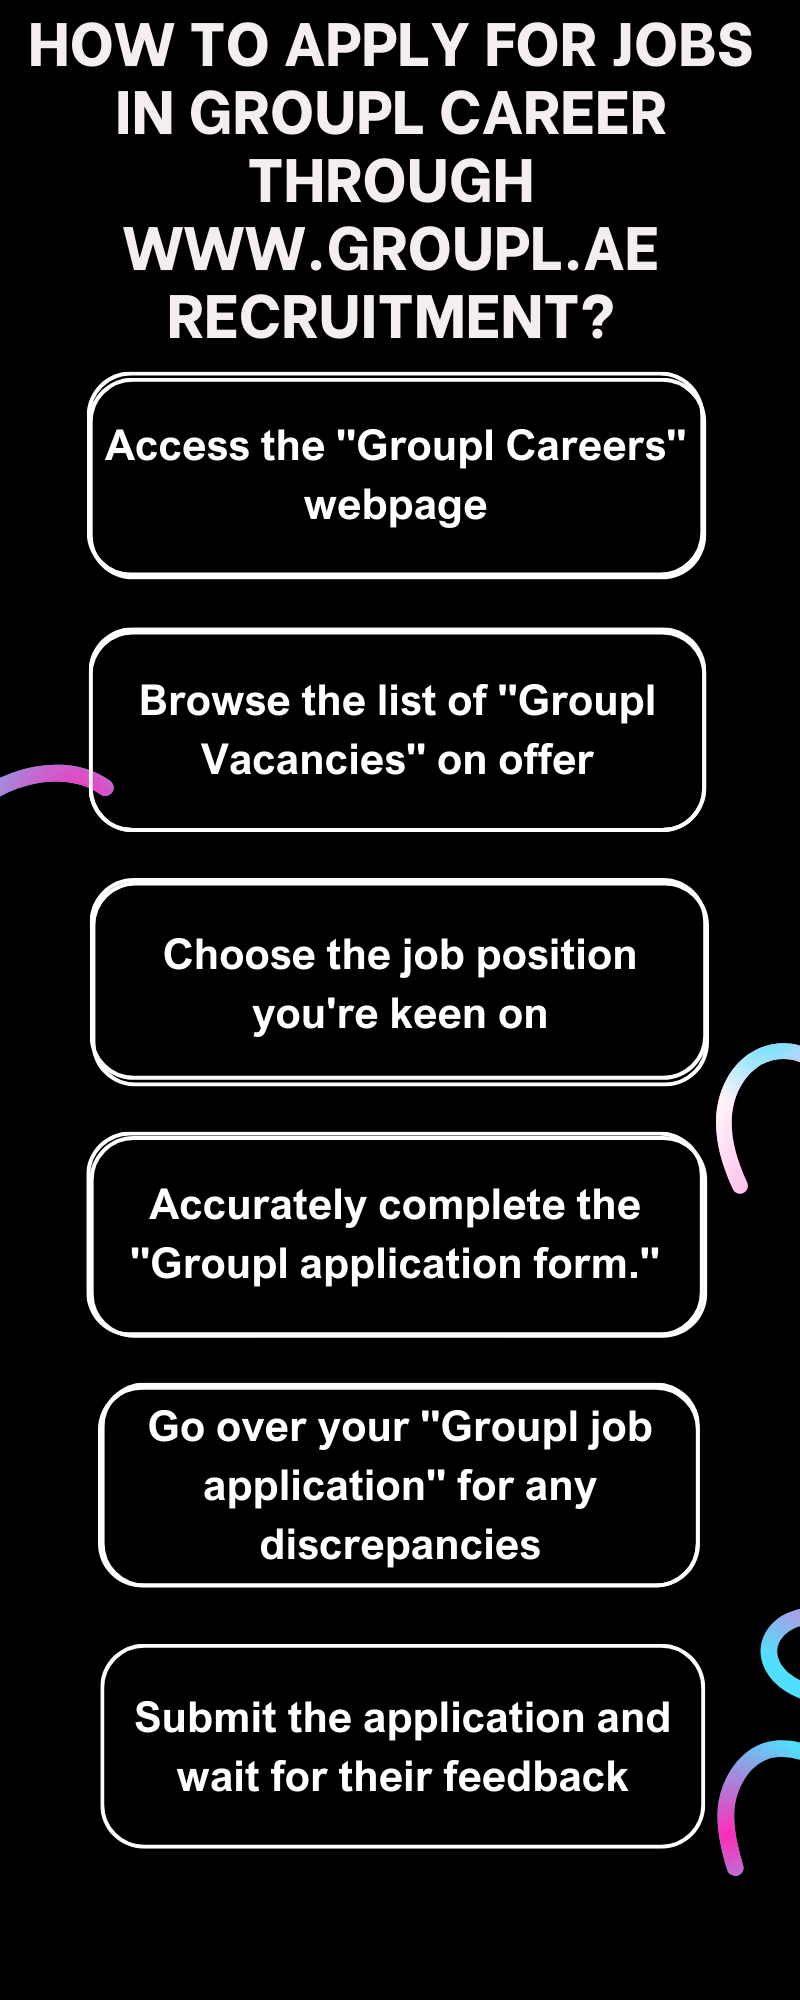 How to Apply for Jobs in Groupl Career through www.groupl.ae recruitment?